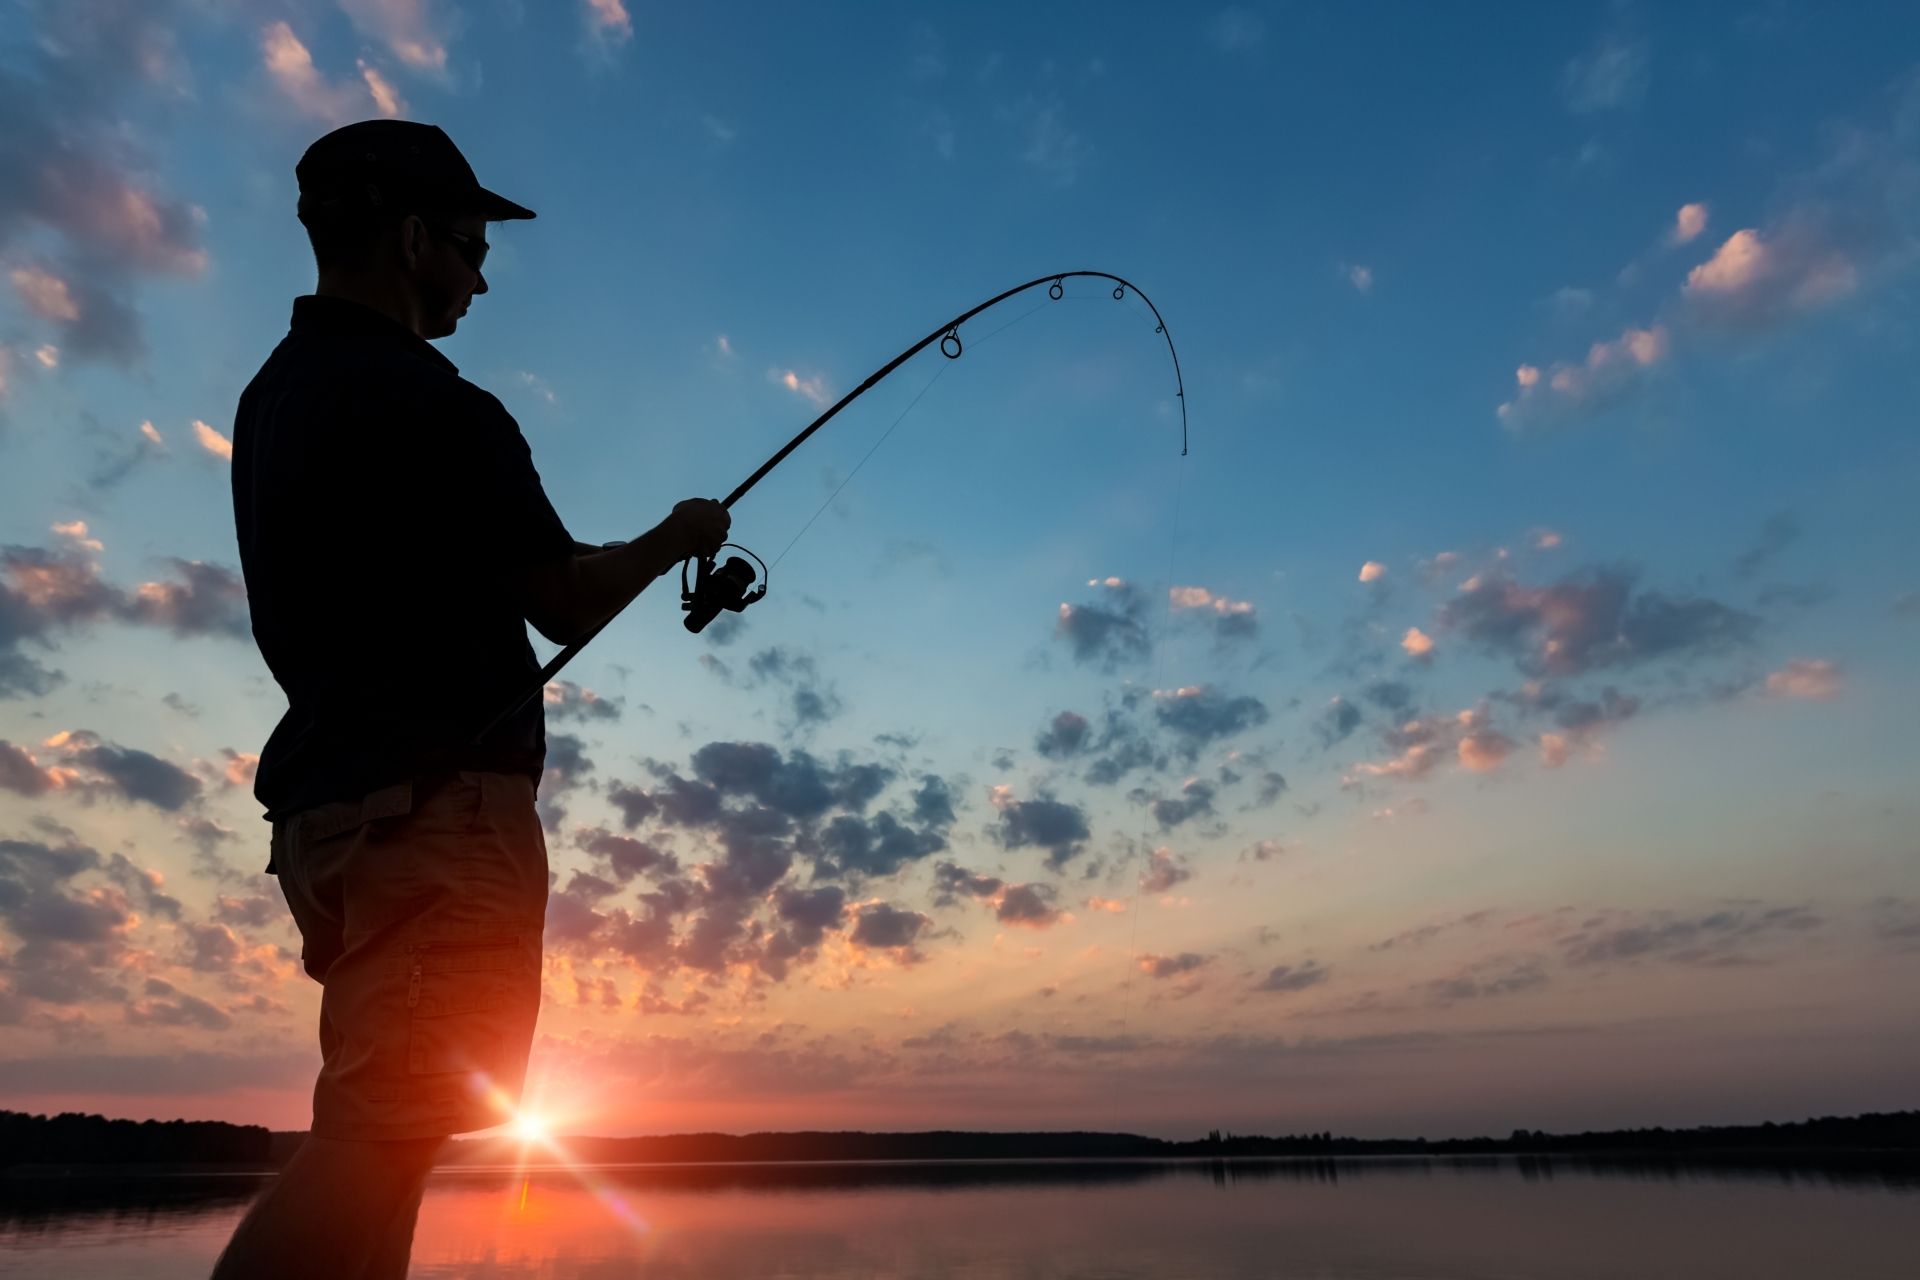 A man's silhouette fishing in the sunset